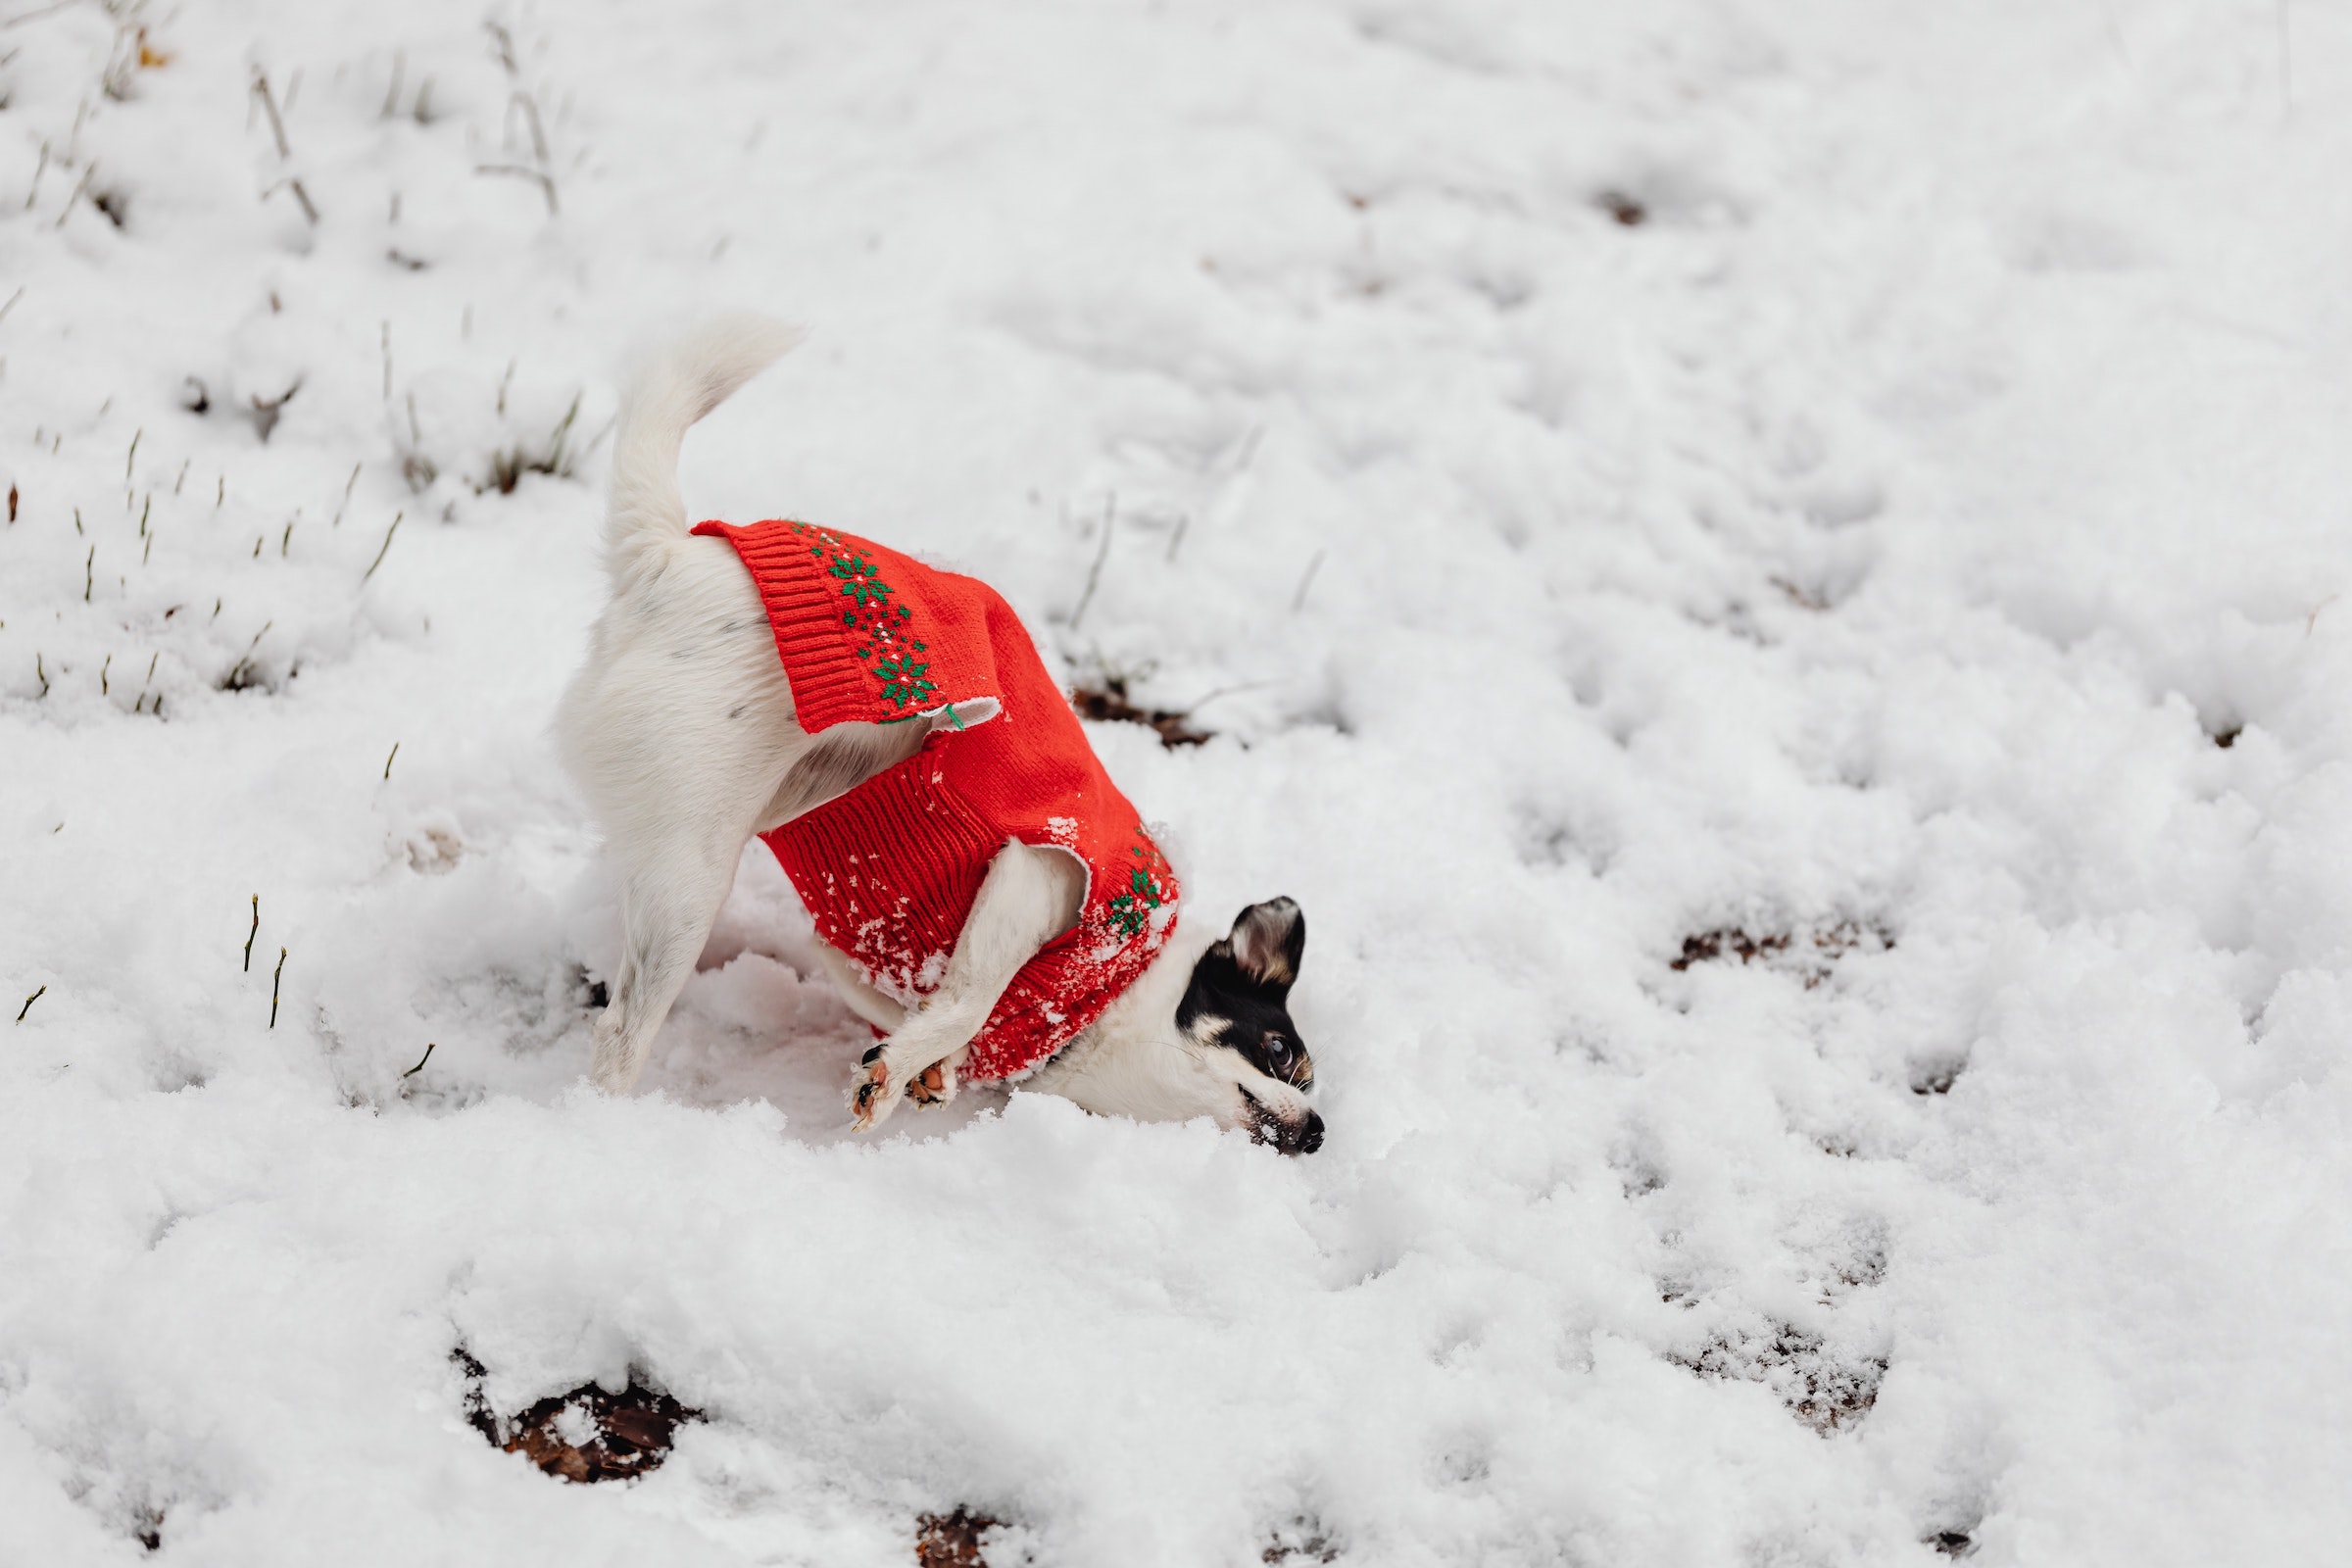 A white Chihuahua with black markings is wearing a red sweater rubbing the front of their body in the snow